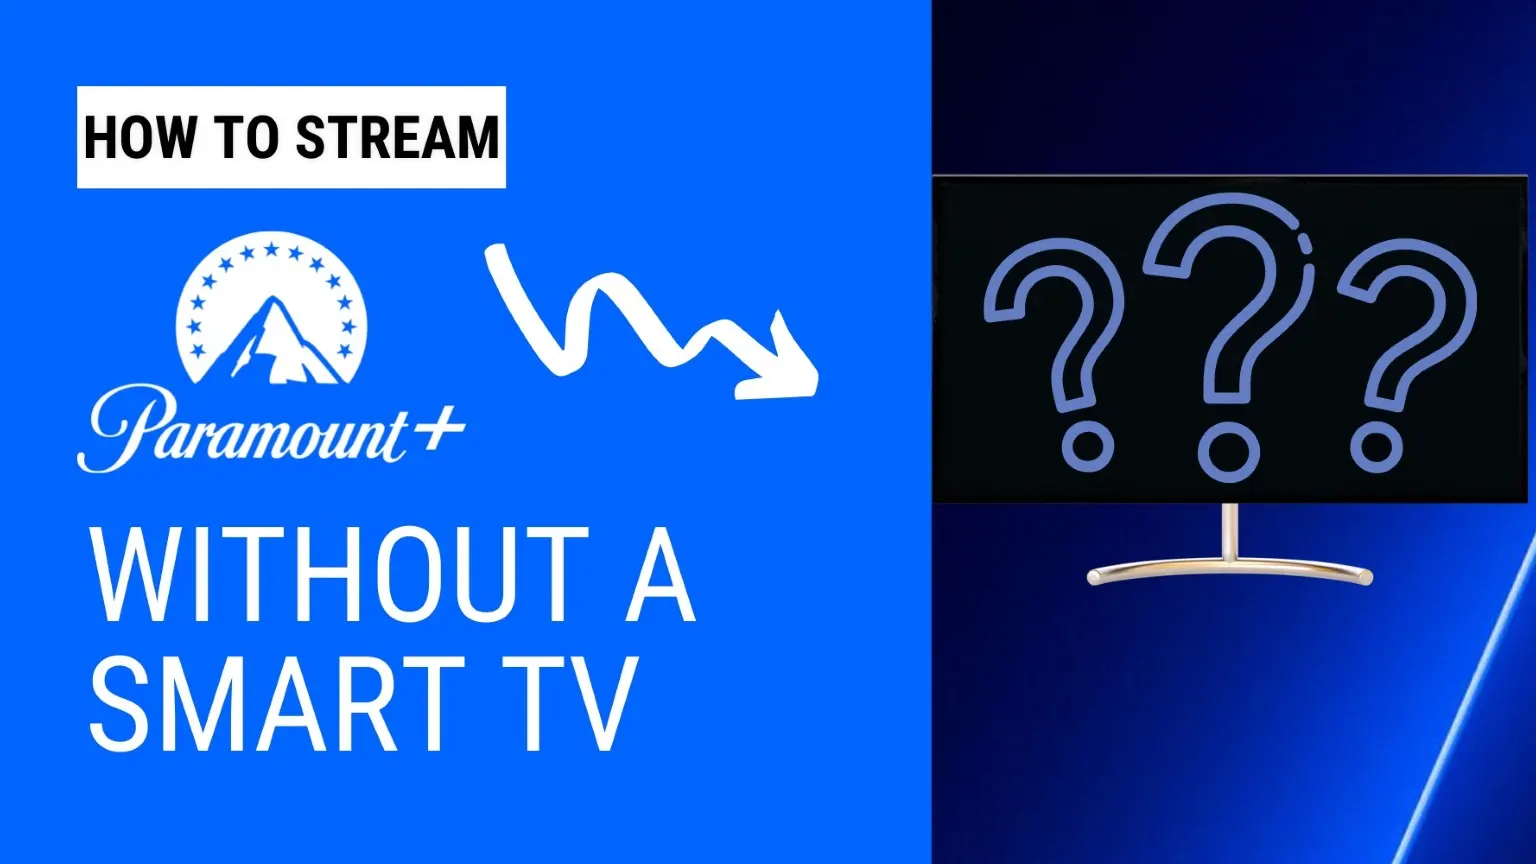 How to stream Paramount+ to the big screen without a smart TV